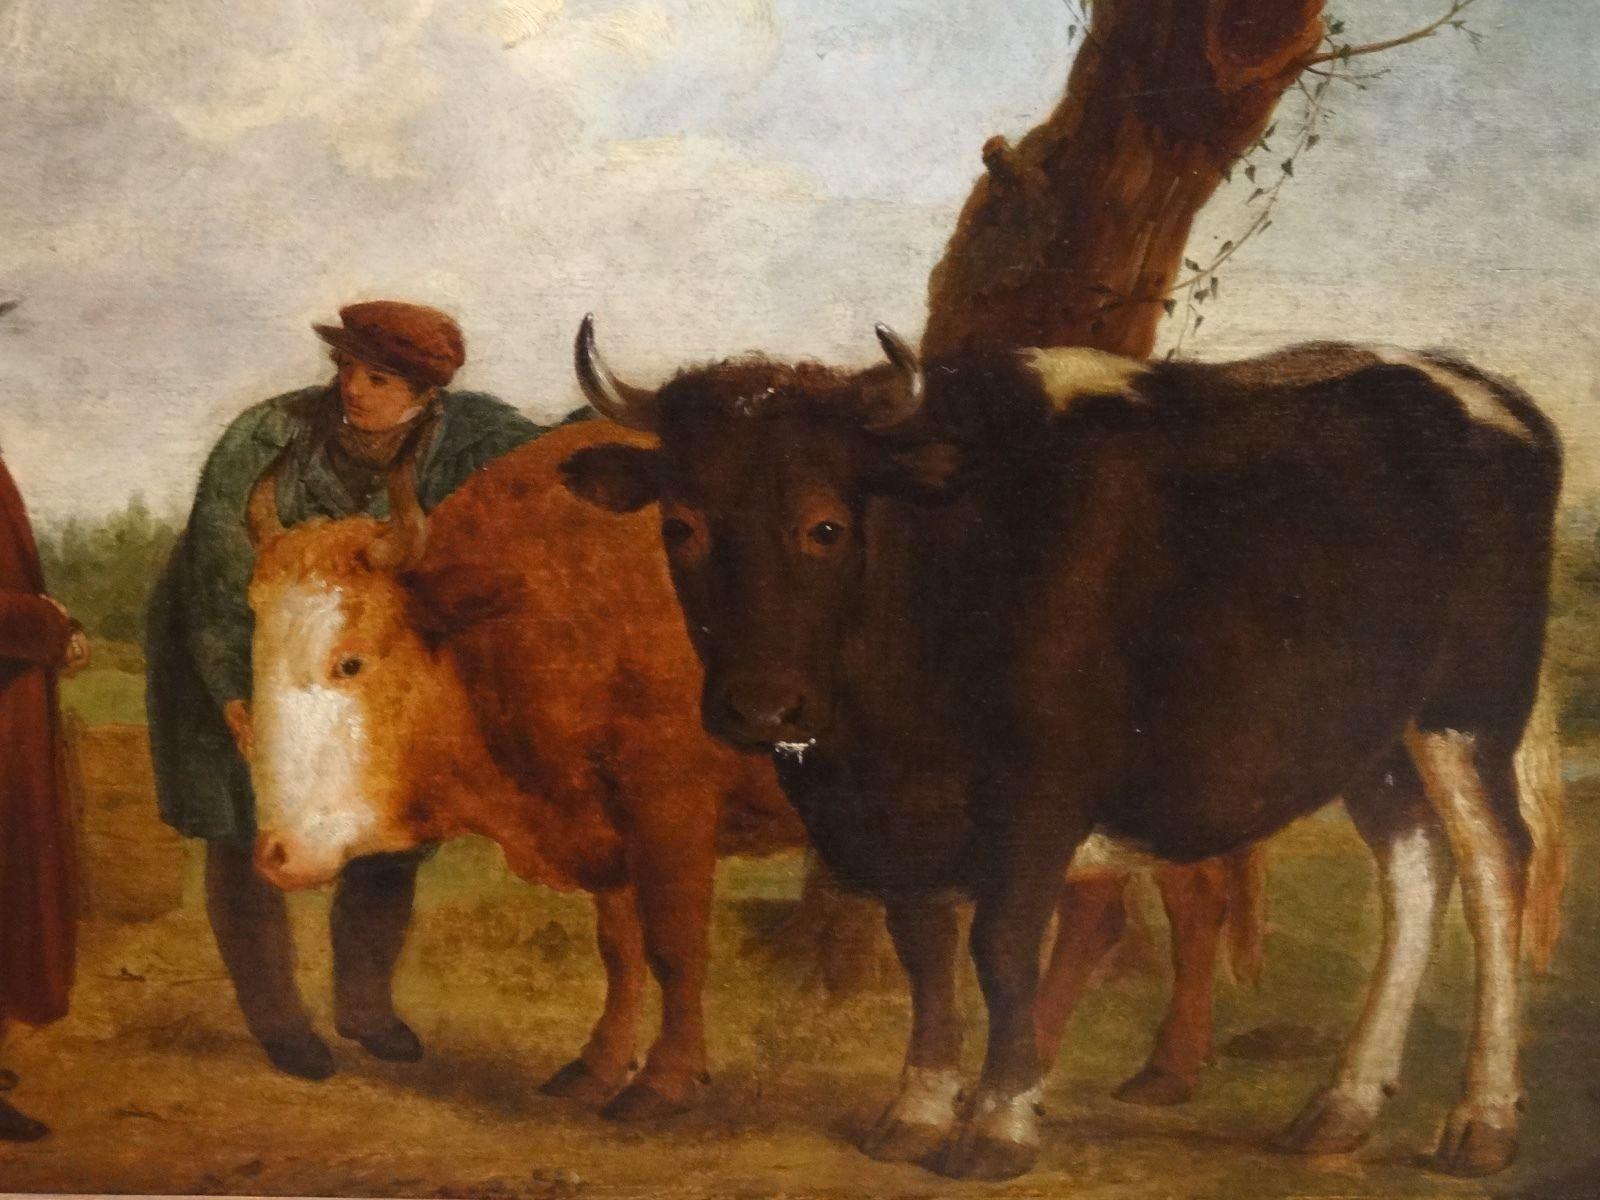 Prize Bulls, Farmer & Owner, 18th Century  - Painting by Unknown